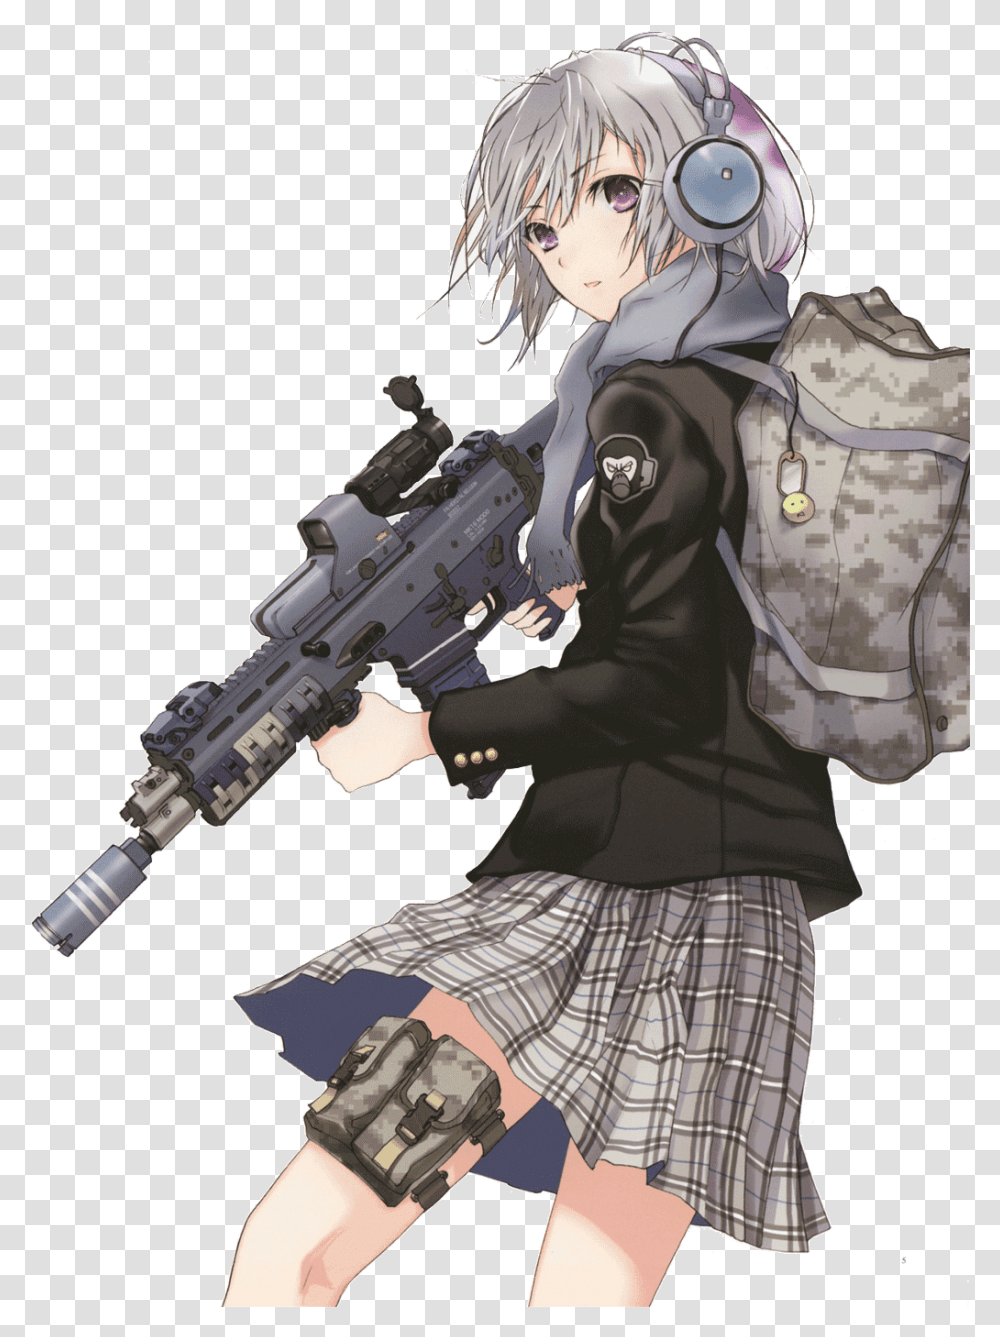 Download Anime Gun Images Soldier Anime Girl, Weapon, Person, Clothing, Manga Transparent Png